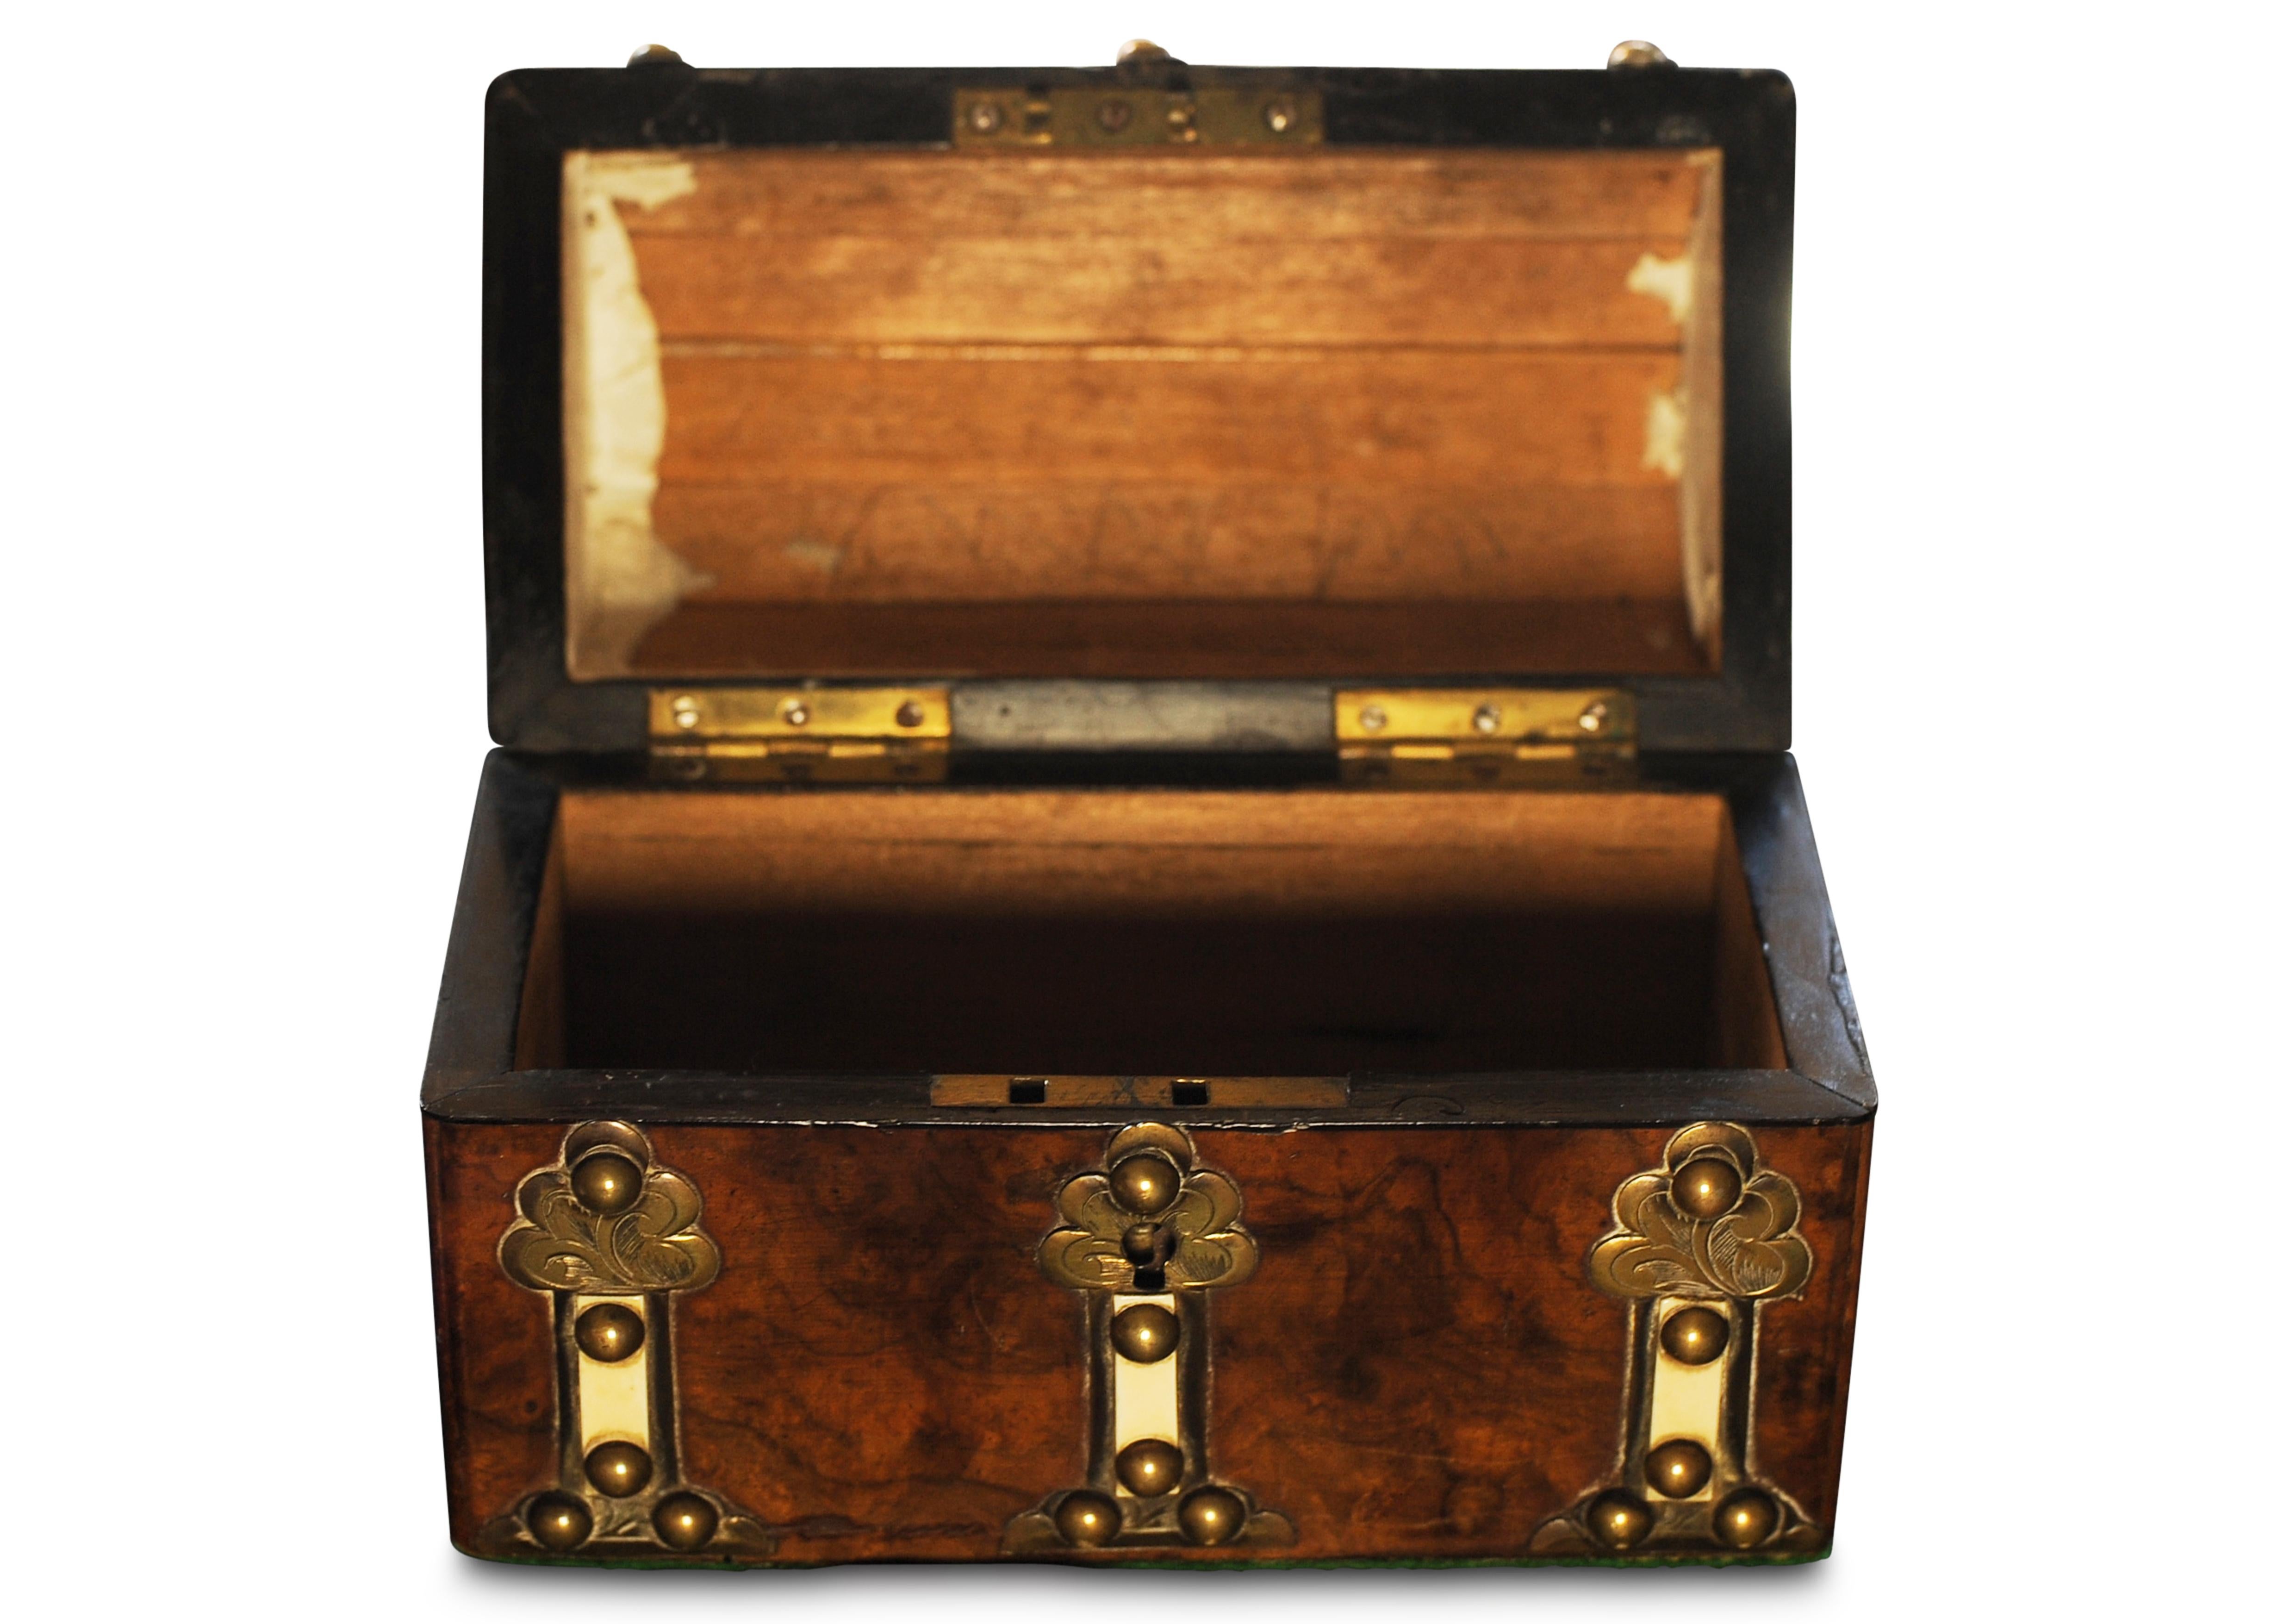 Beautiful Victorian Burr Walnut Studded Keepsake Chest With Engraved Brass Details & Camel Bone Supports 1800's 
Would make an ideal present for any occasion.